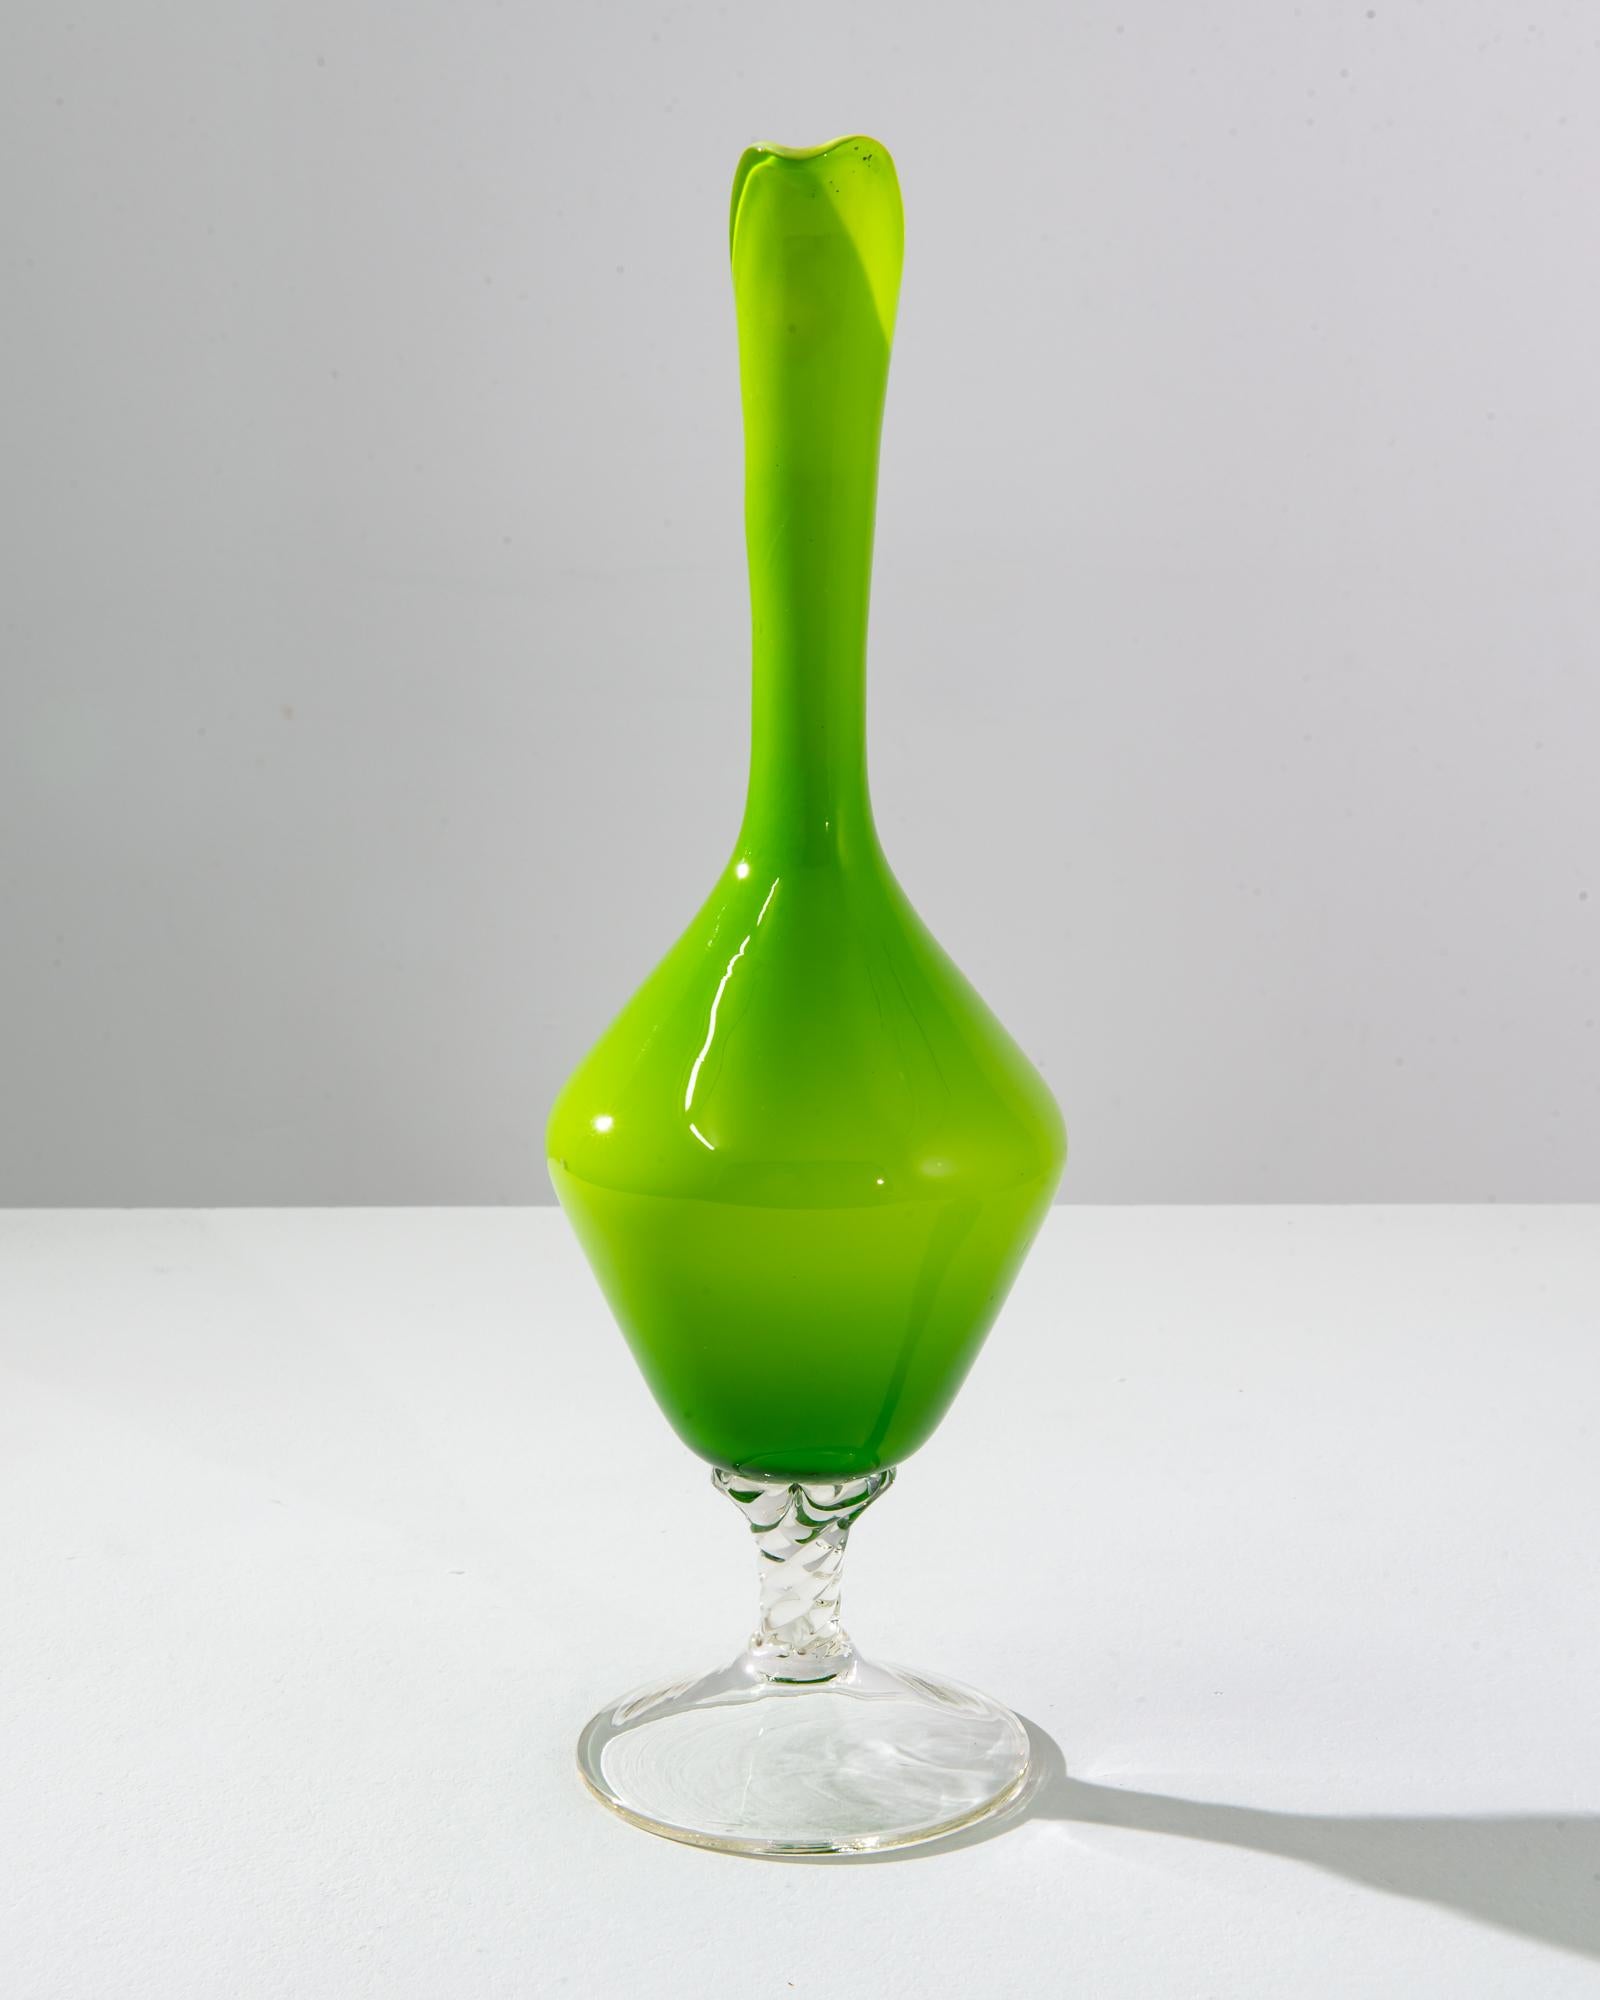 This vibrant 1960s Italian green glass jug is a splendid example of the bold and expressive design ethos of the era. Its luminous lime green body draws the eye, evoking the fresh zest of citrus and the vivacity of springtime. The jug is crafted with